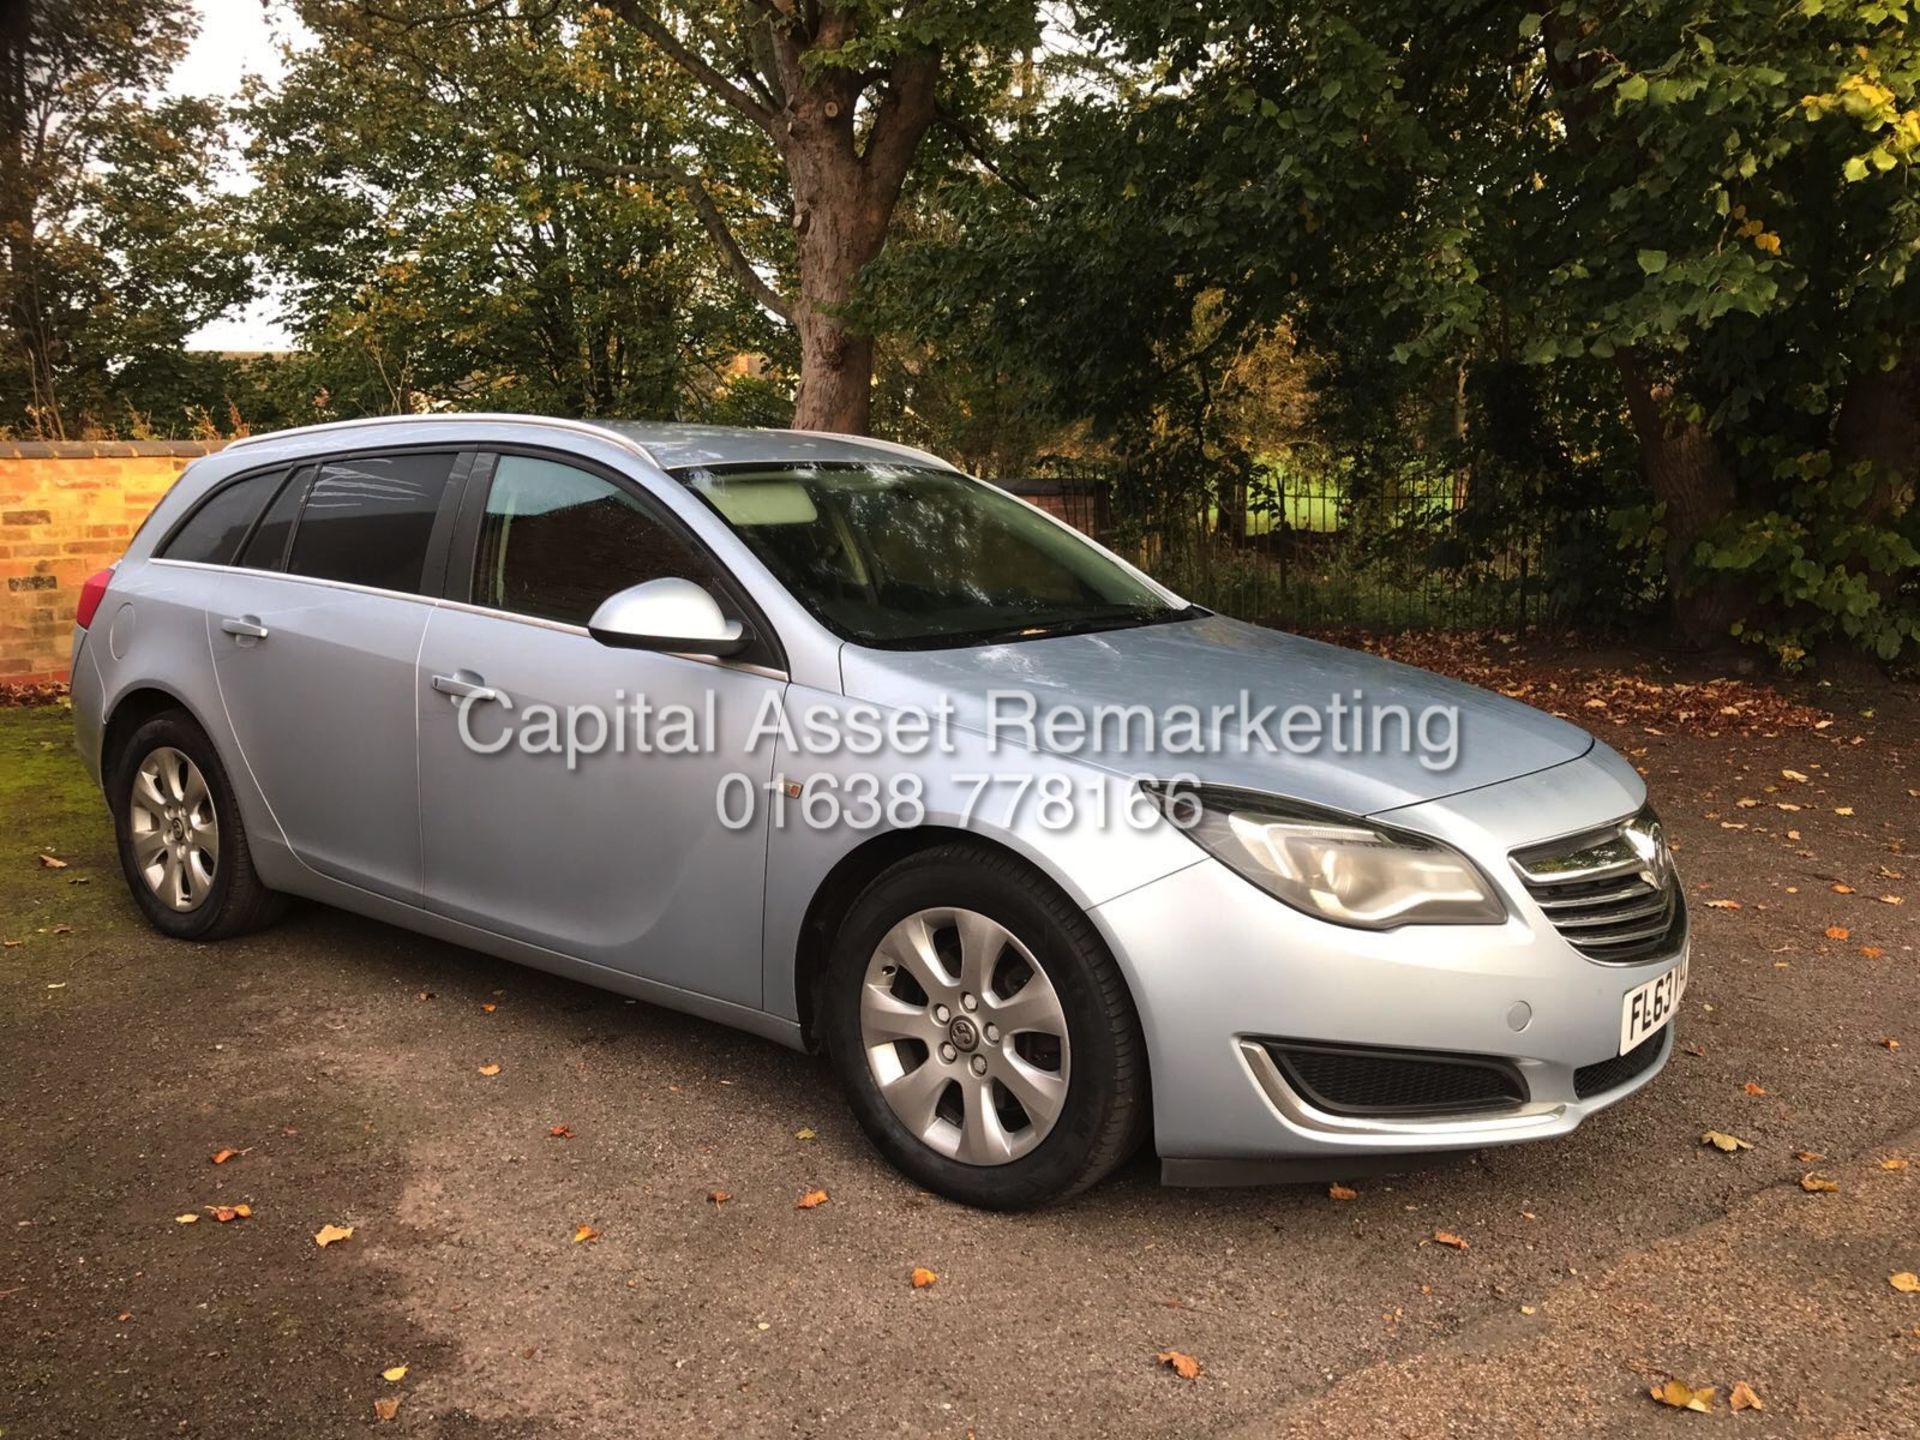 On Sale VAUXHALL INSIGNIA 2.0CDTI ESTATE - (2014) MODEL - 1 OWNER - GREAT SPEC - FSH - NEW SHAPE - - Image 13 of 14